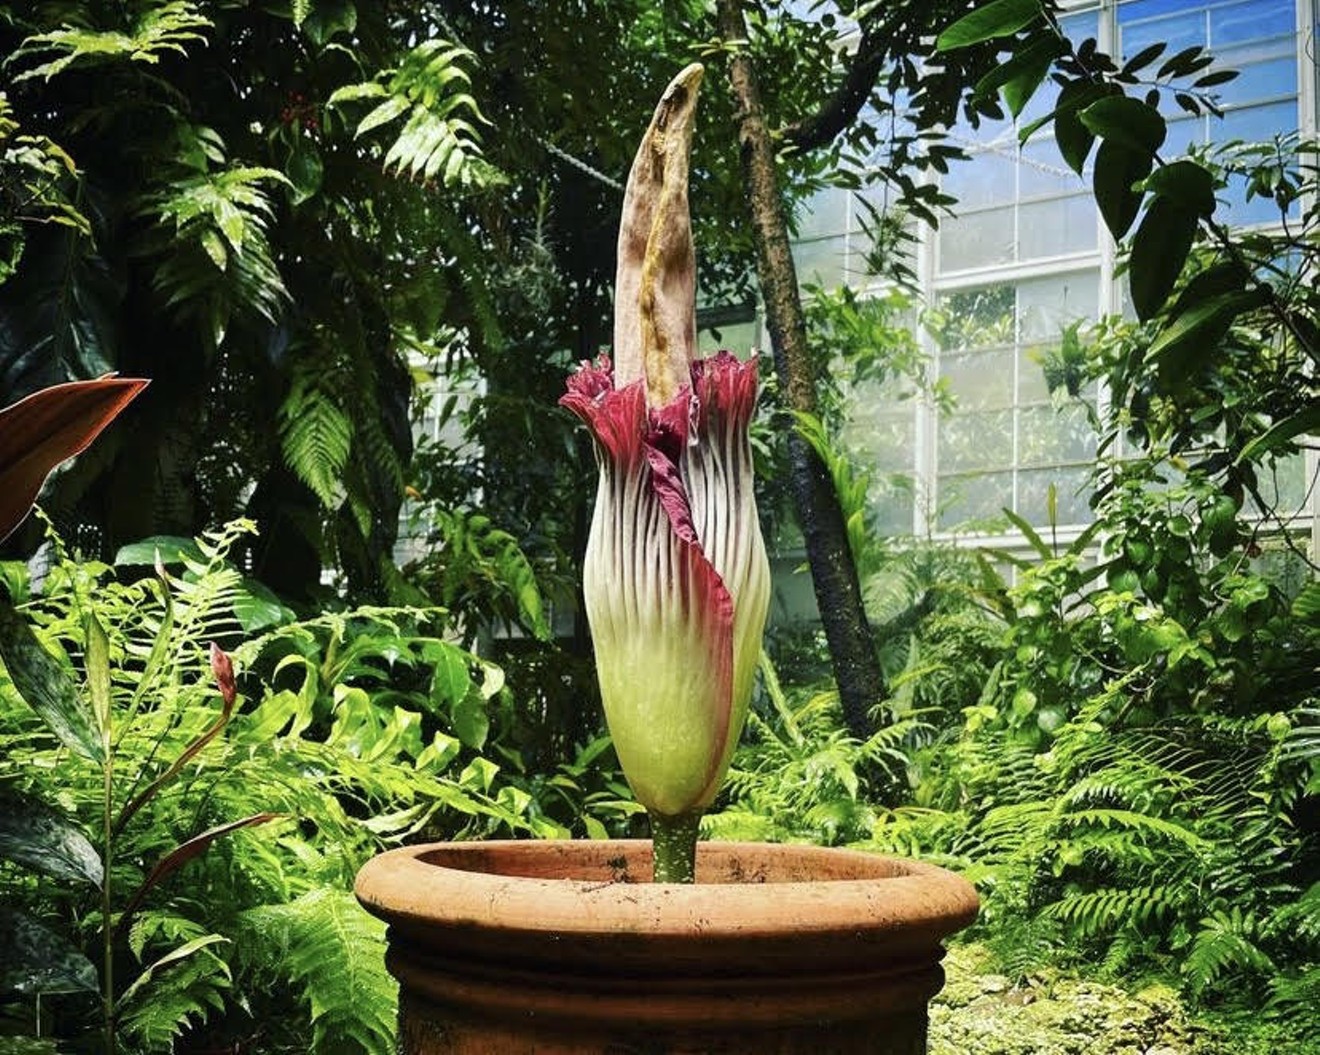 It’s been 18 years since a Titan Arum bloomed at Fairchild, and this specific plant — affectionately dubbed Mr. Stinky Junior — is expected to bloom at the garden’s Whitman Tropical Fruit Pavilion...perhaps as early as today!